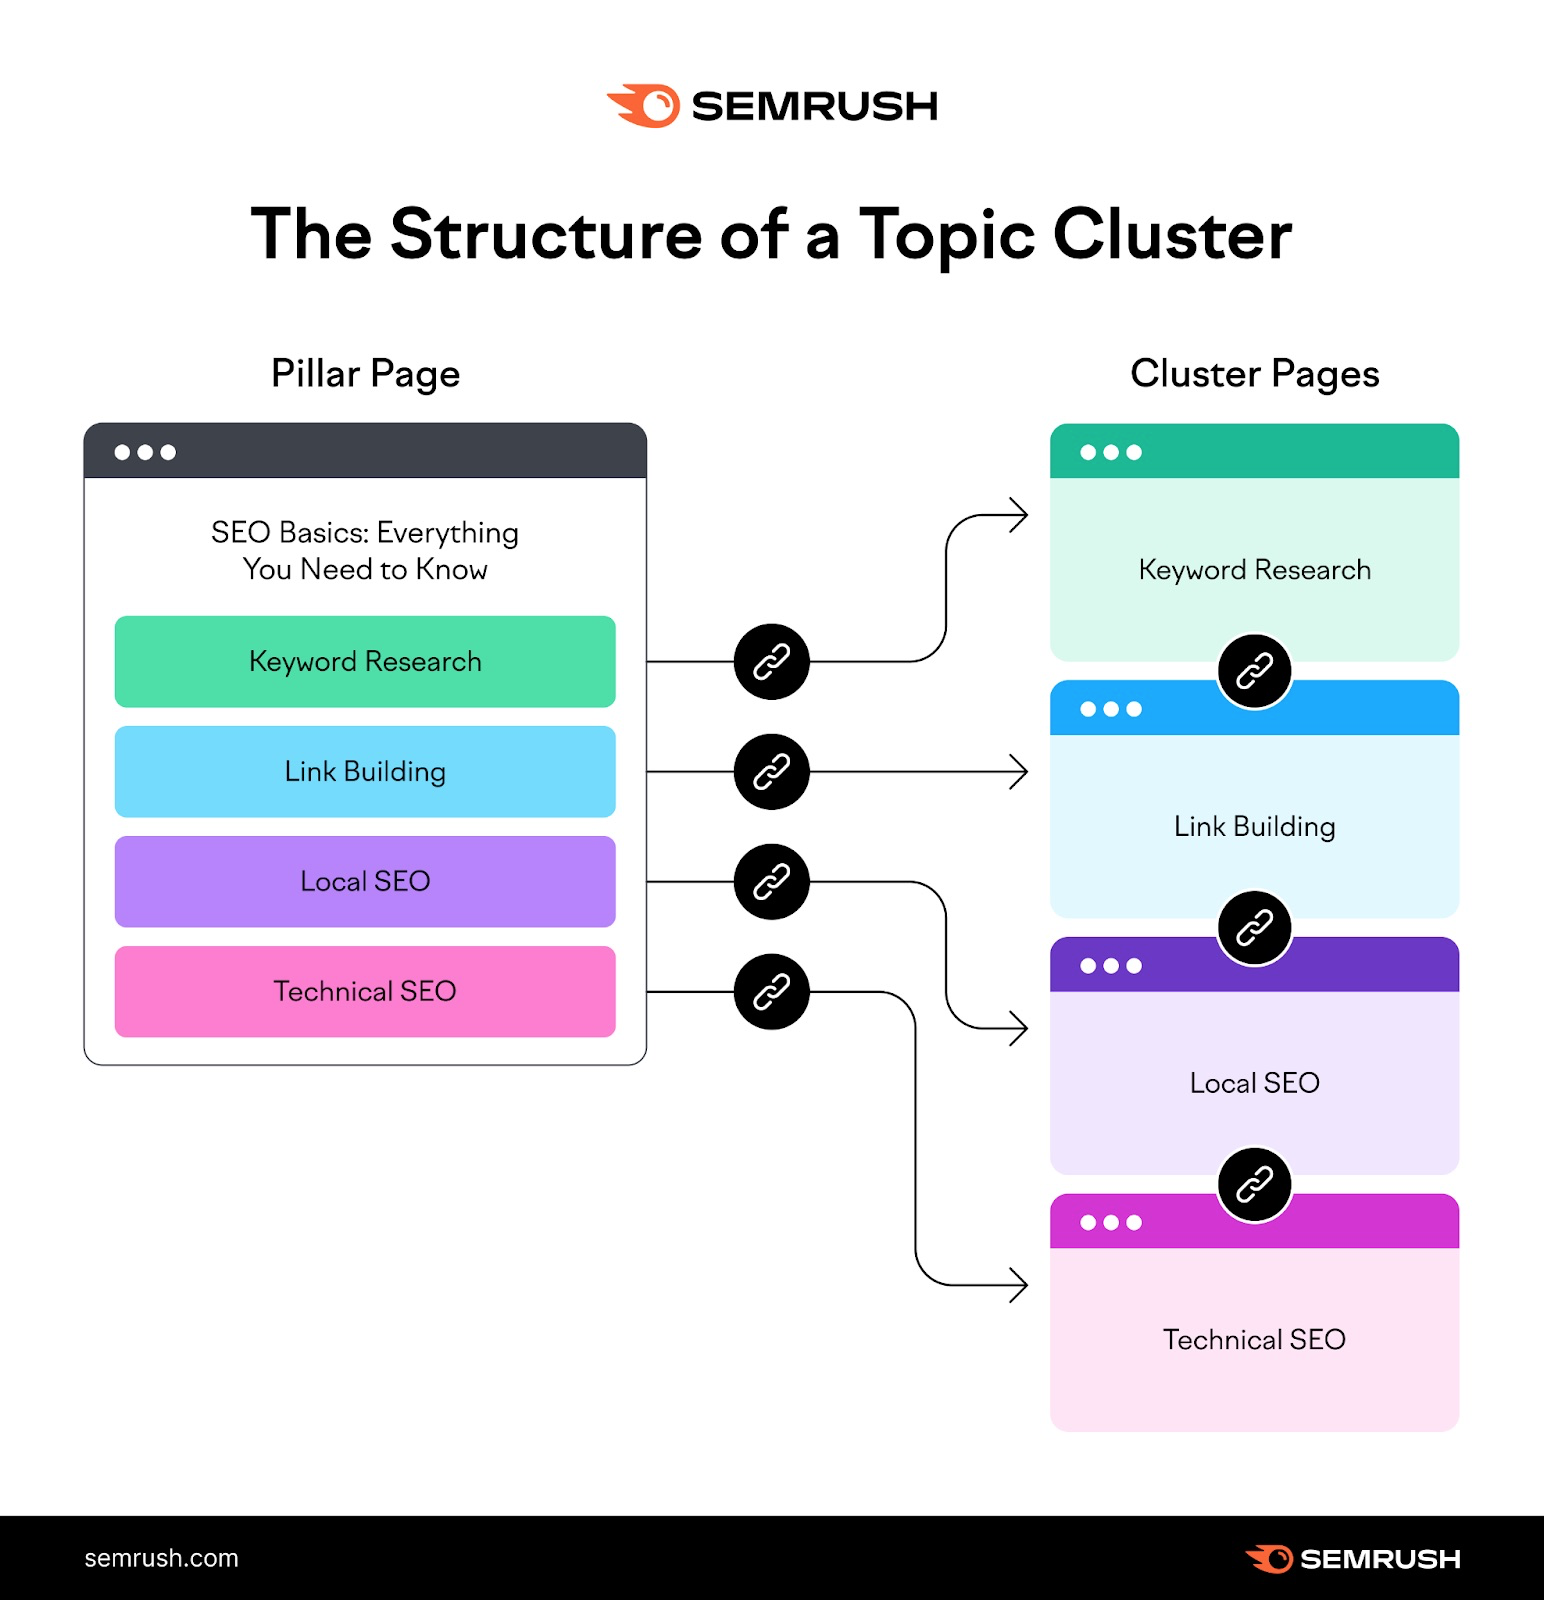 Semrush's infographic showing the structure of a topic cluster